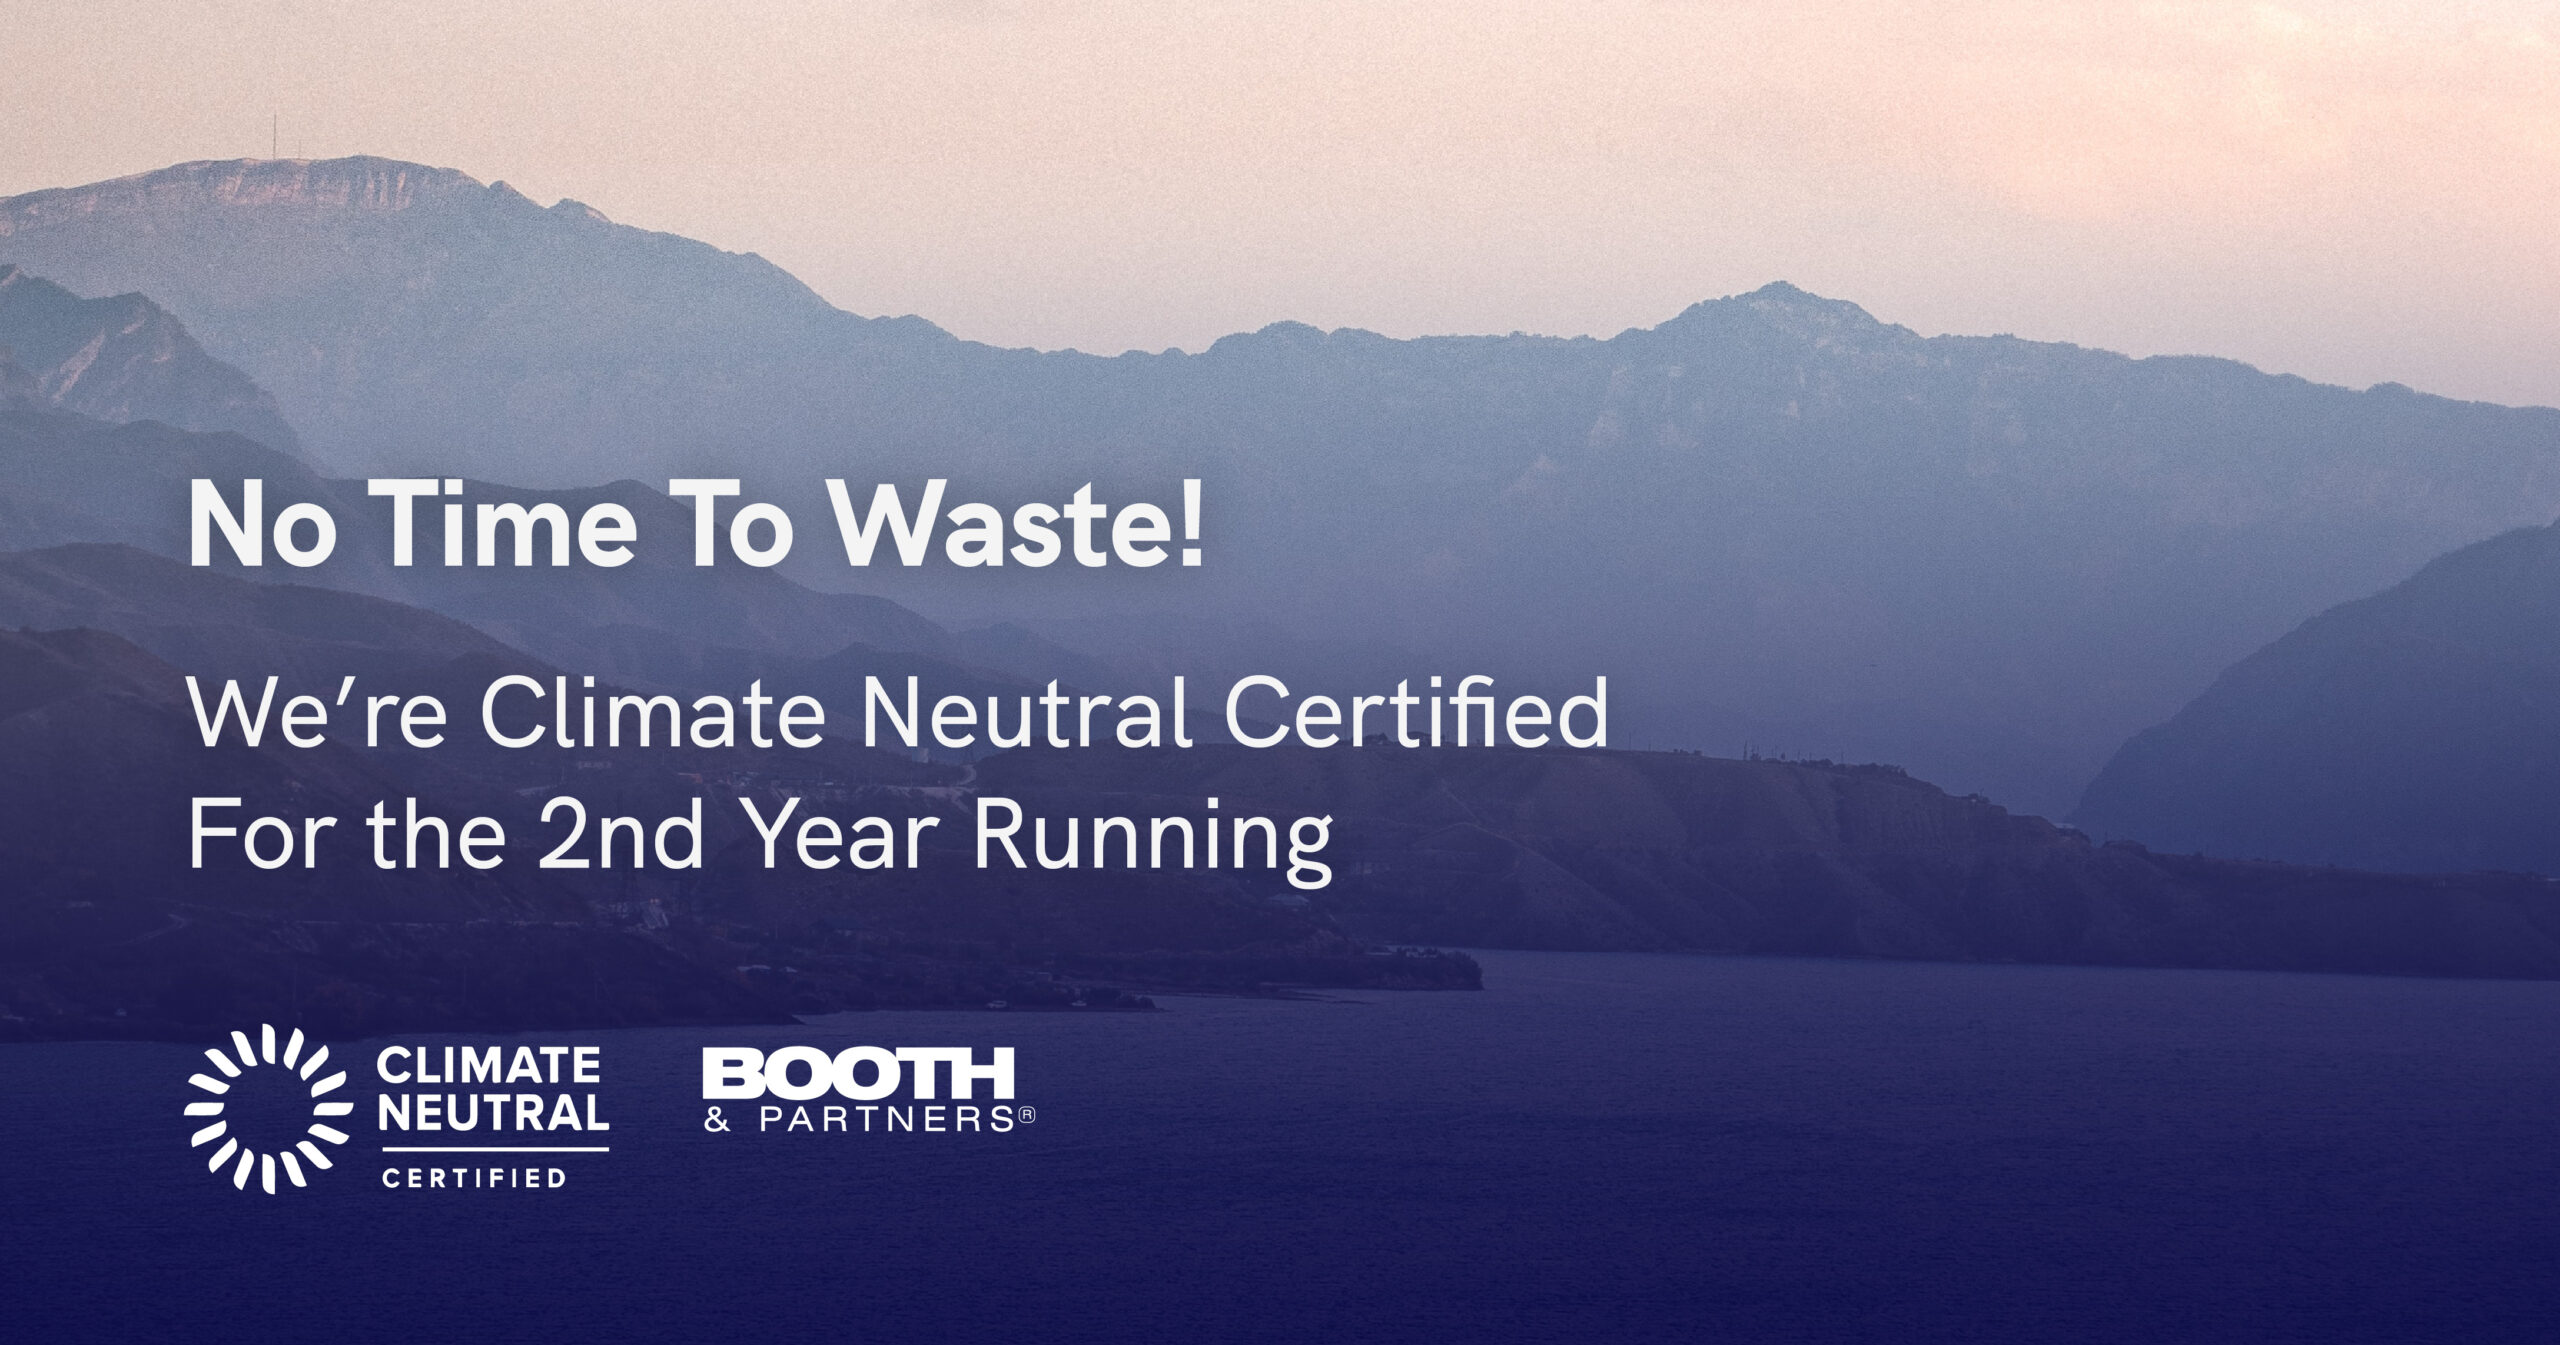 Booth & Partners is Climate Neutral Certified